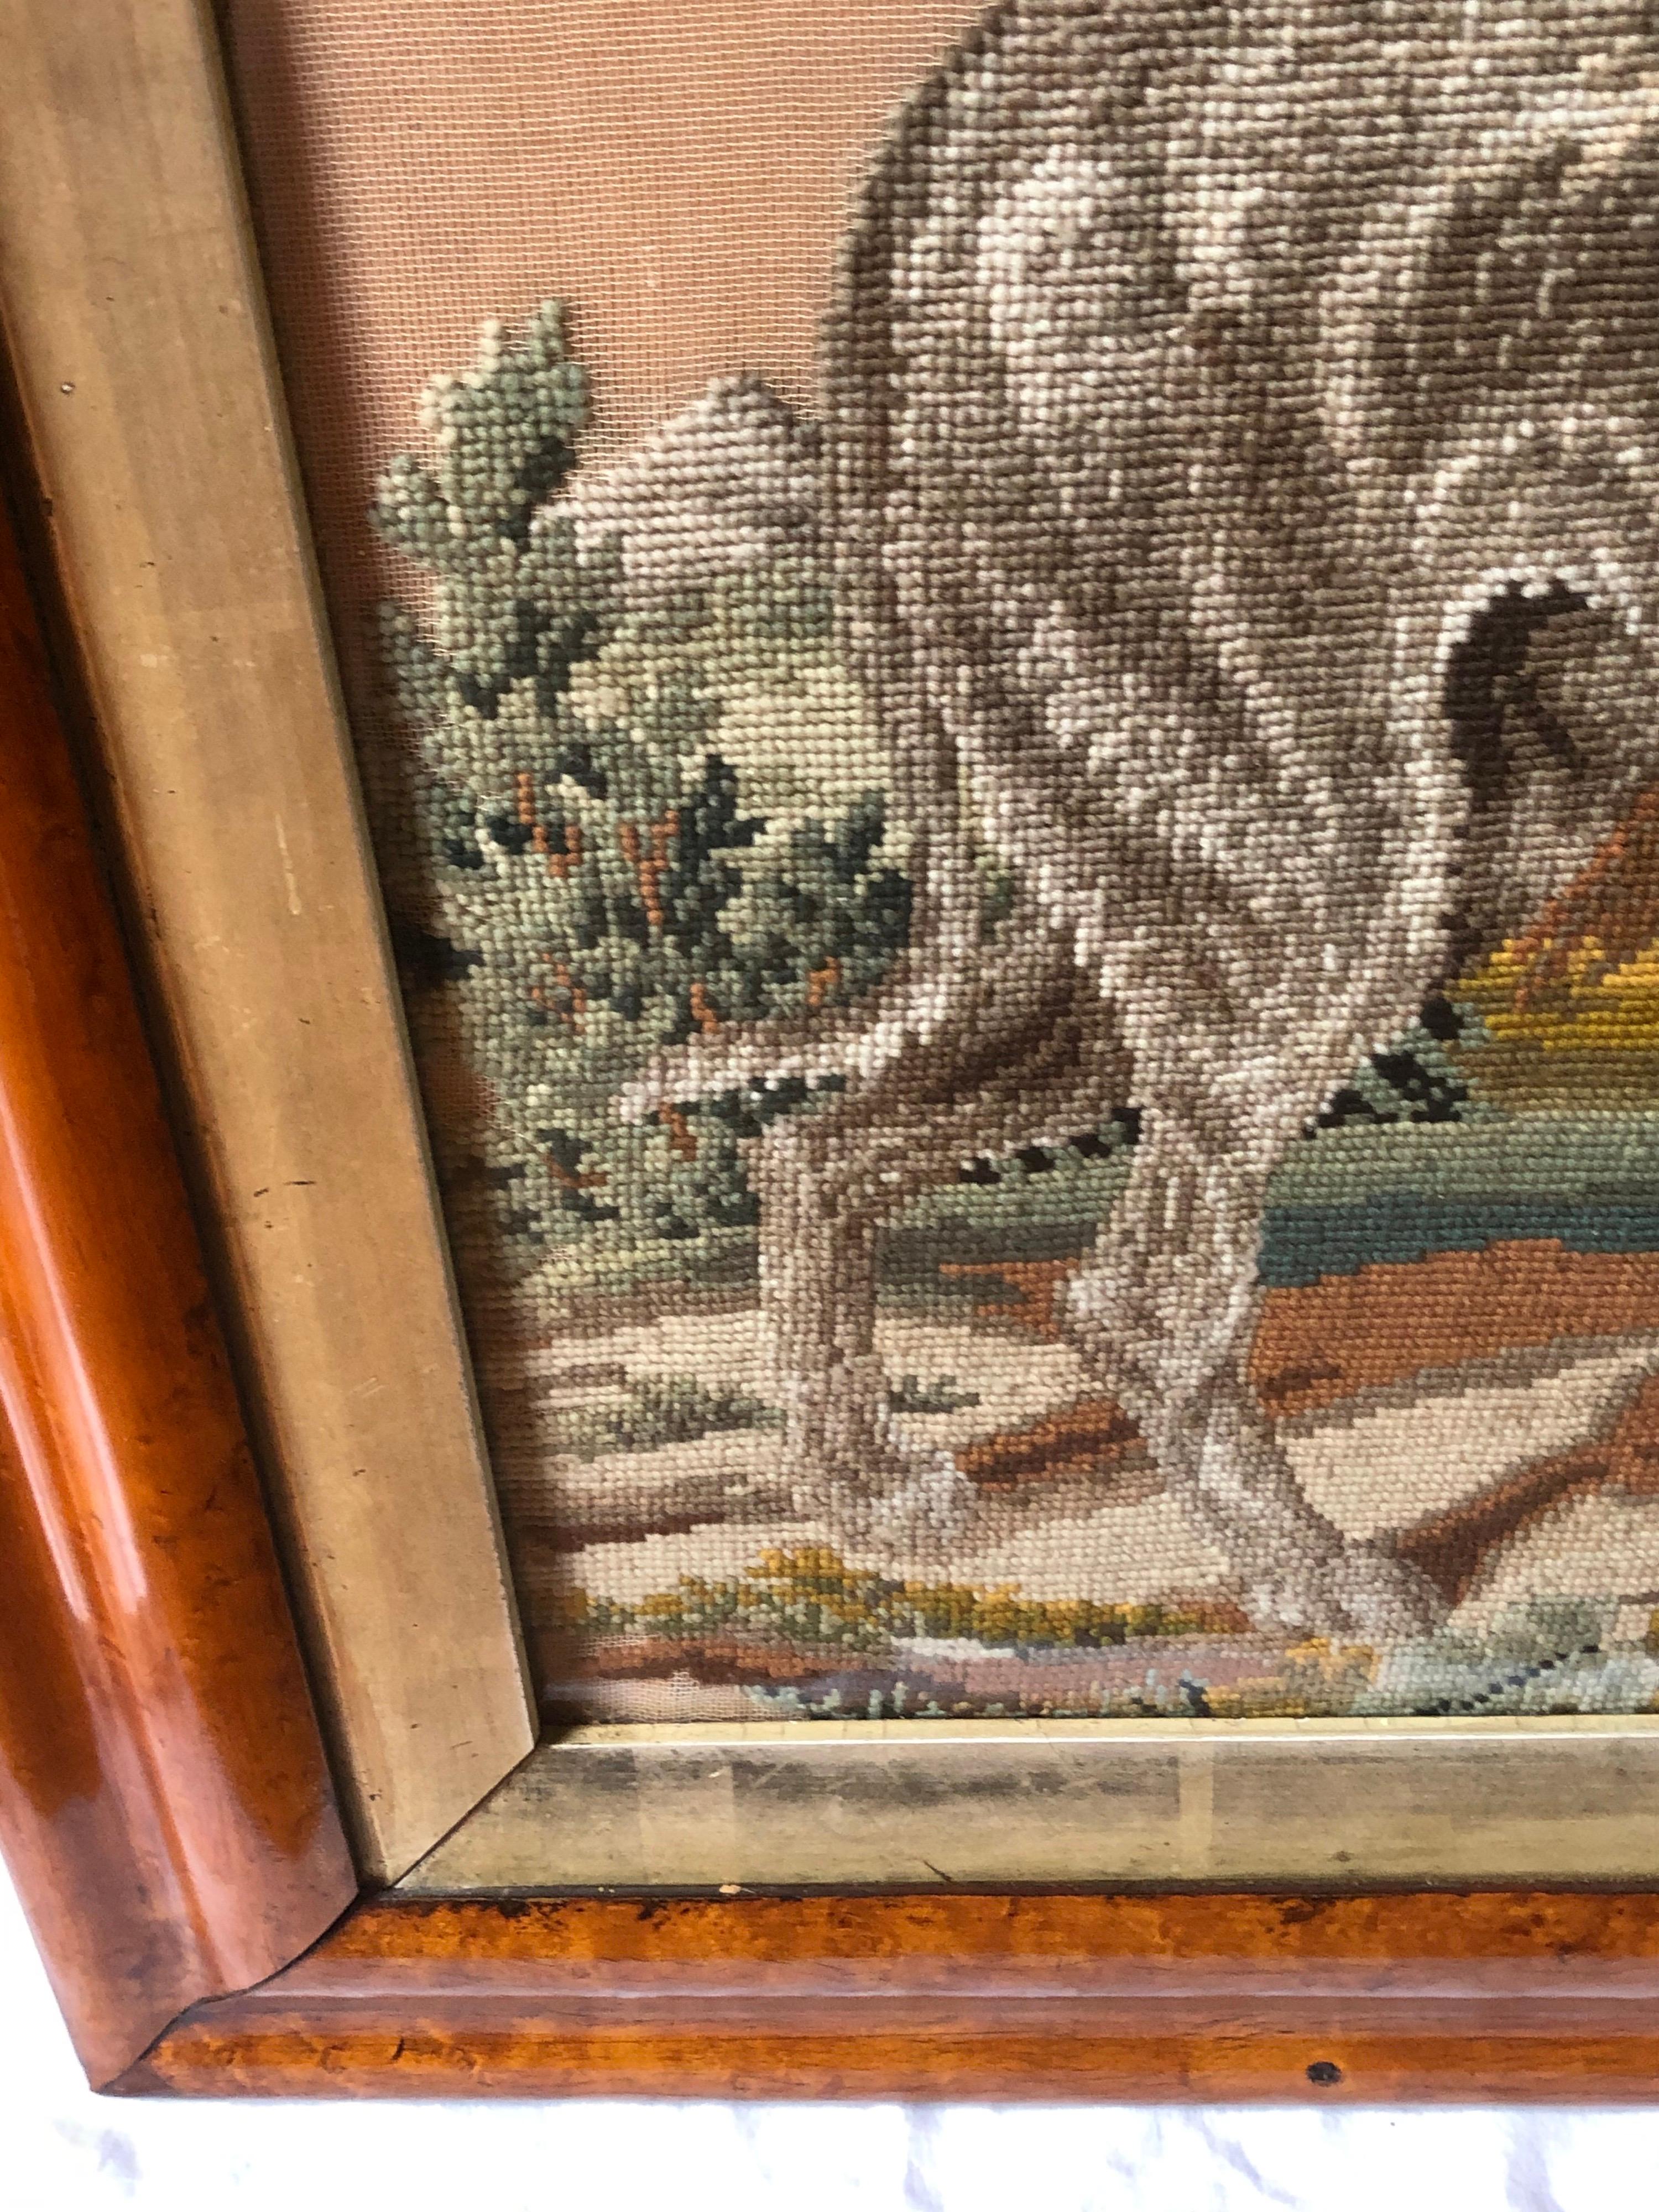 Prince Albert on His Pony Framed Needlepoint In Good Condition For Sale In Hudson, NY